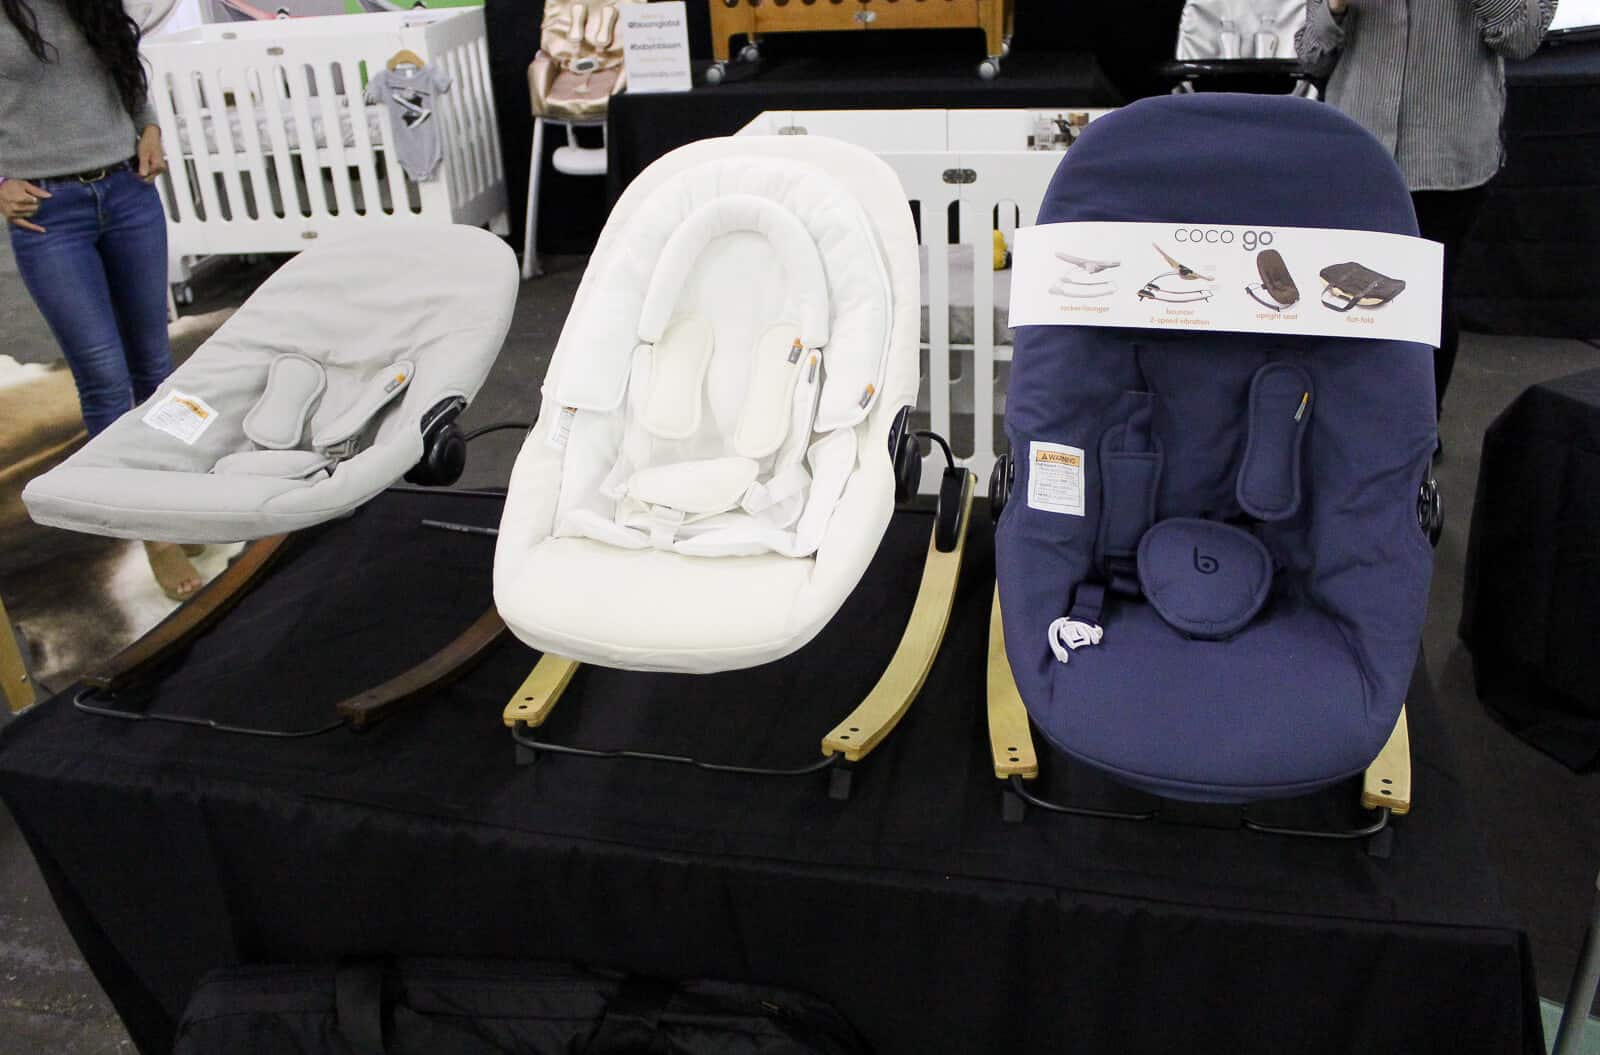 Car seats and baby items at New York Baby Show 2018.